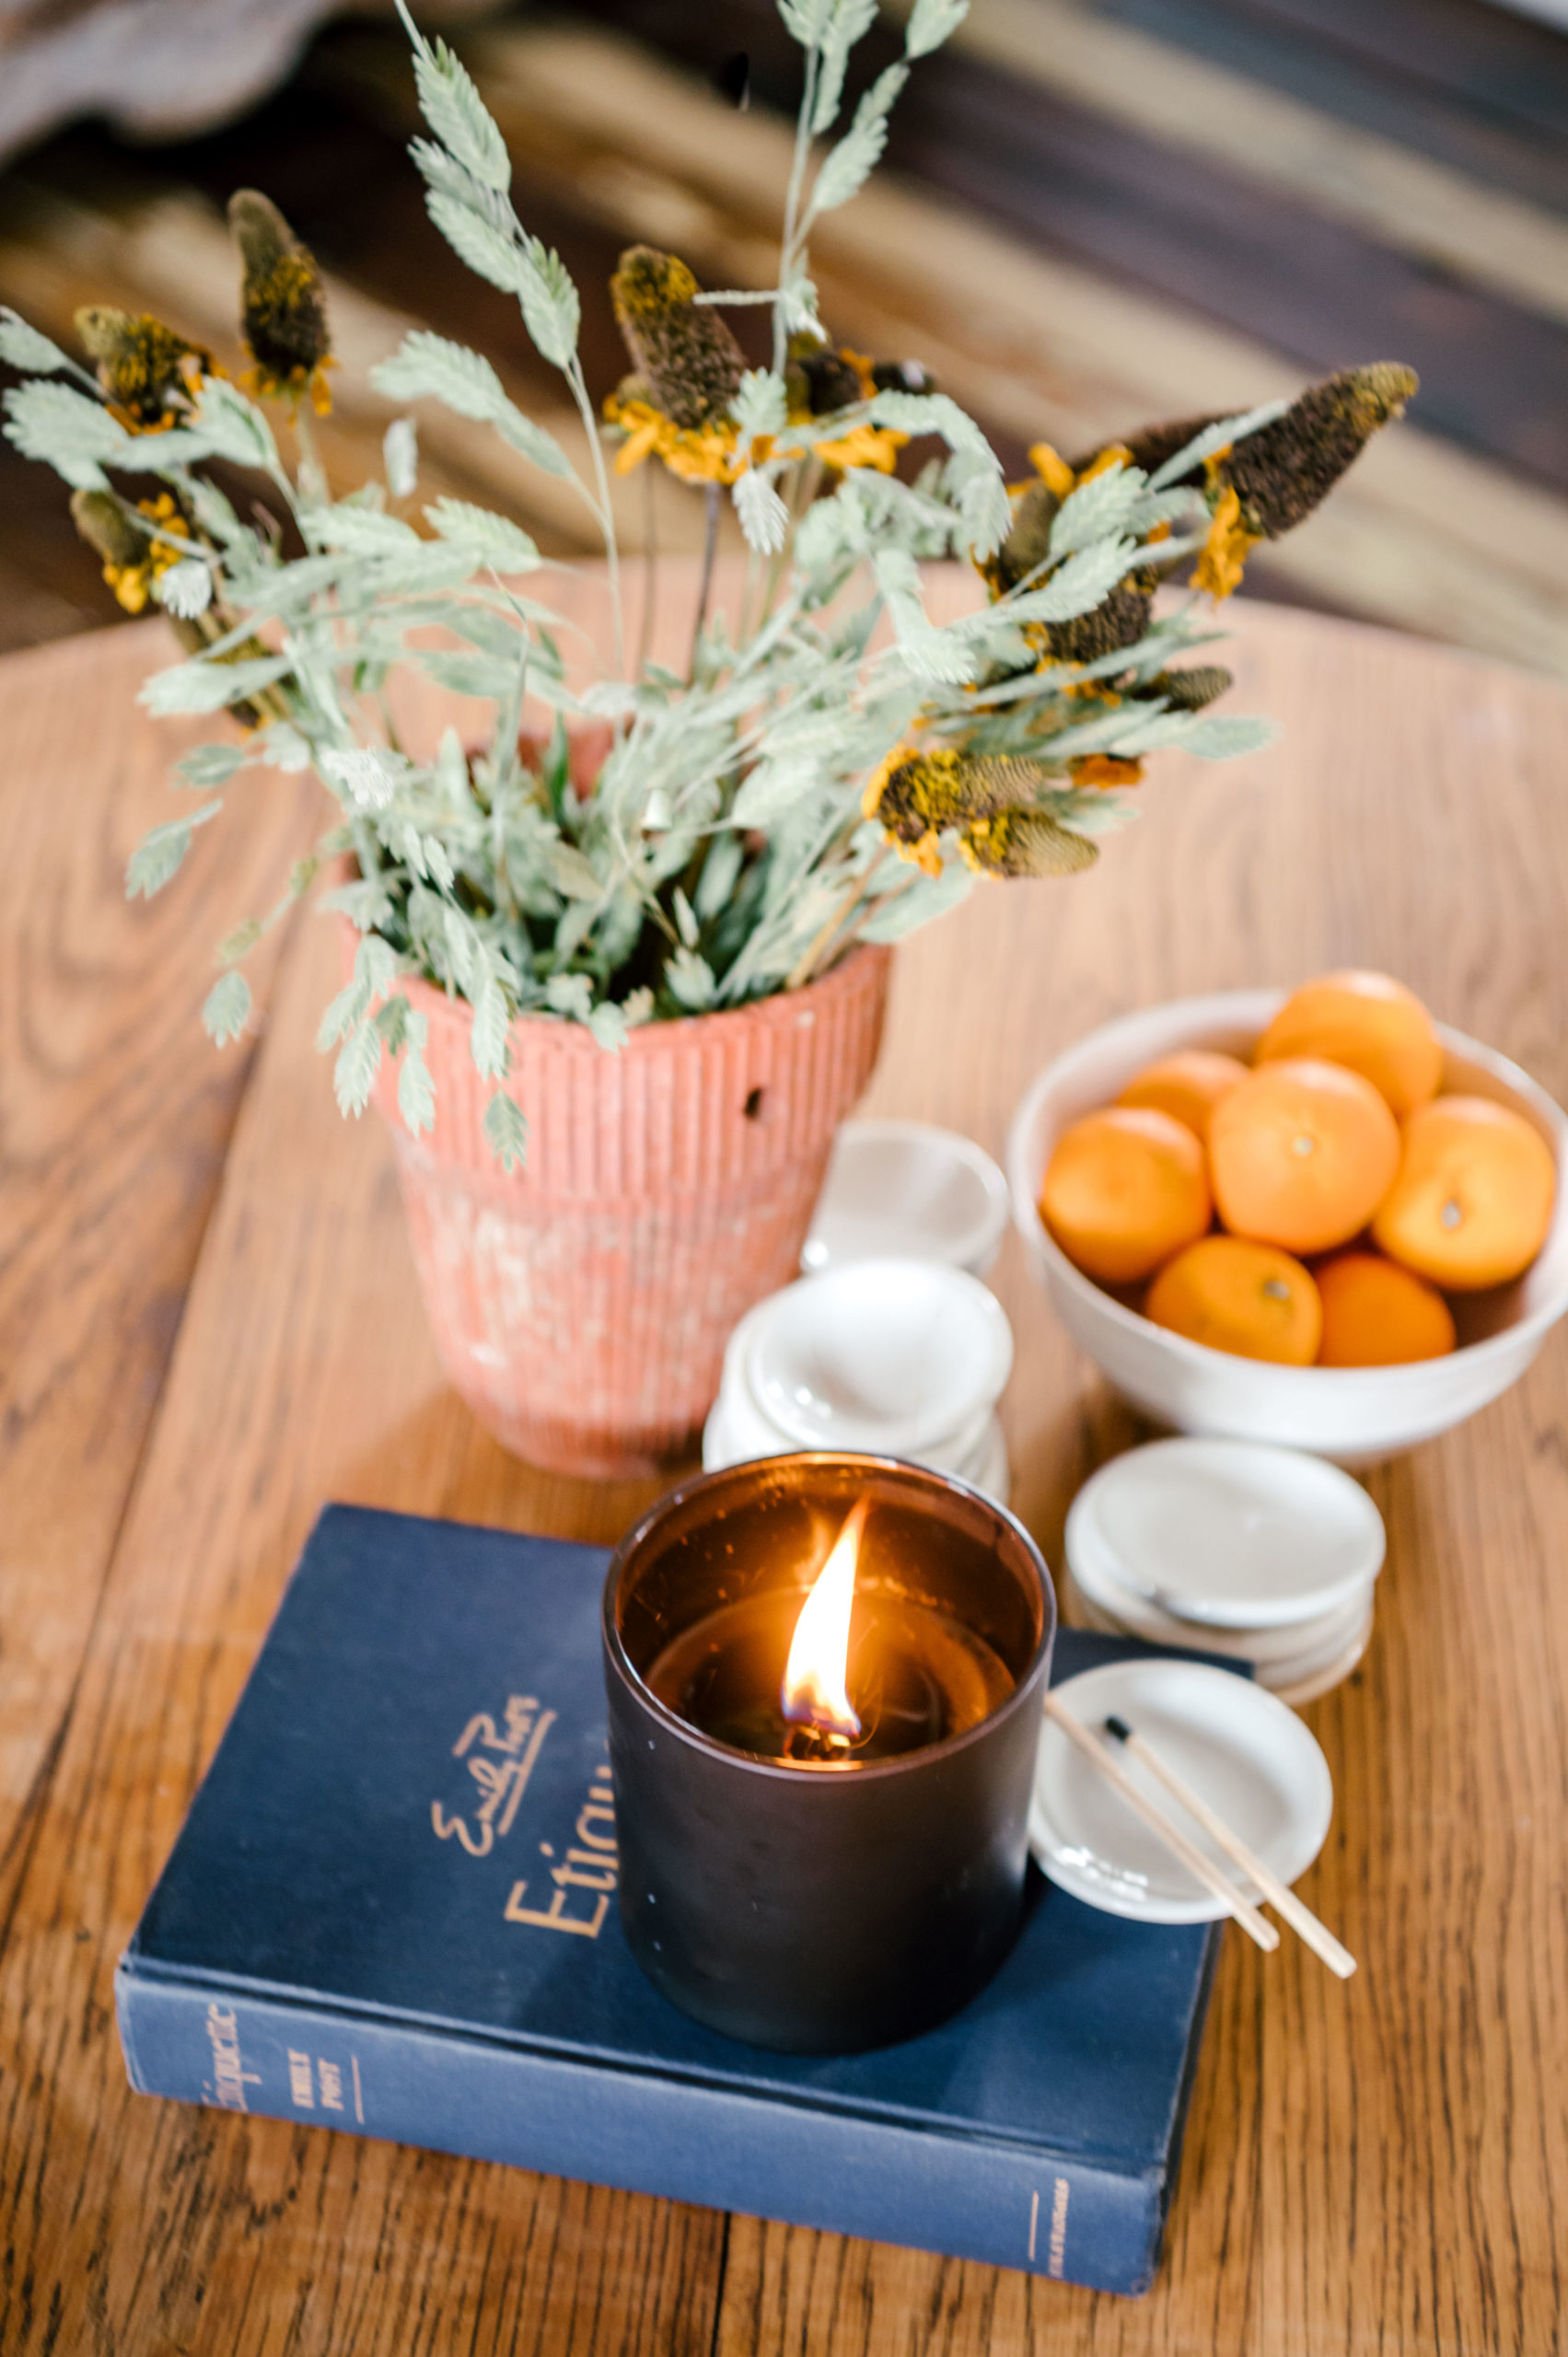 Plant, bowl of oranges, lit candle, and book on a wooden table